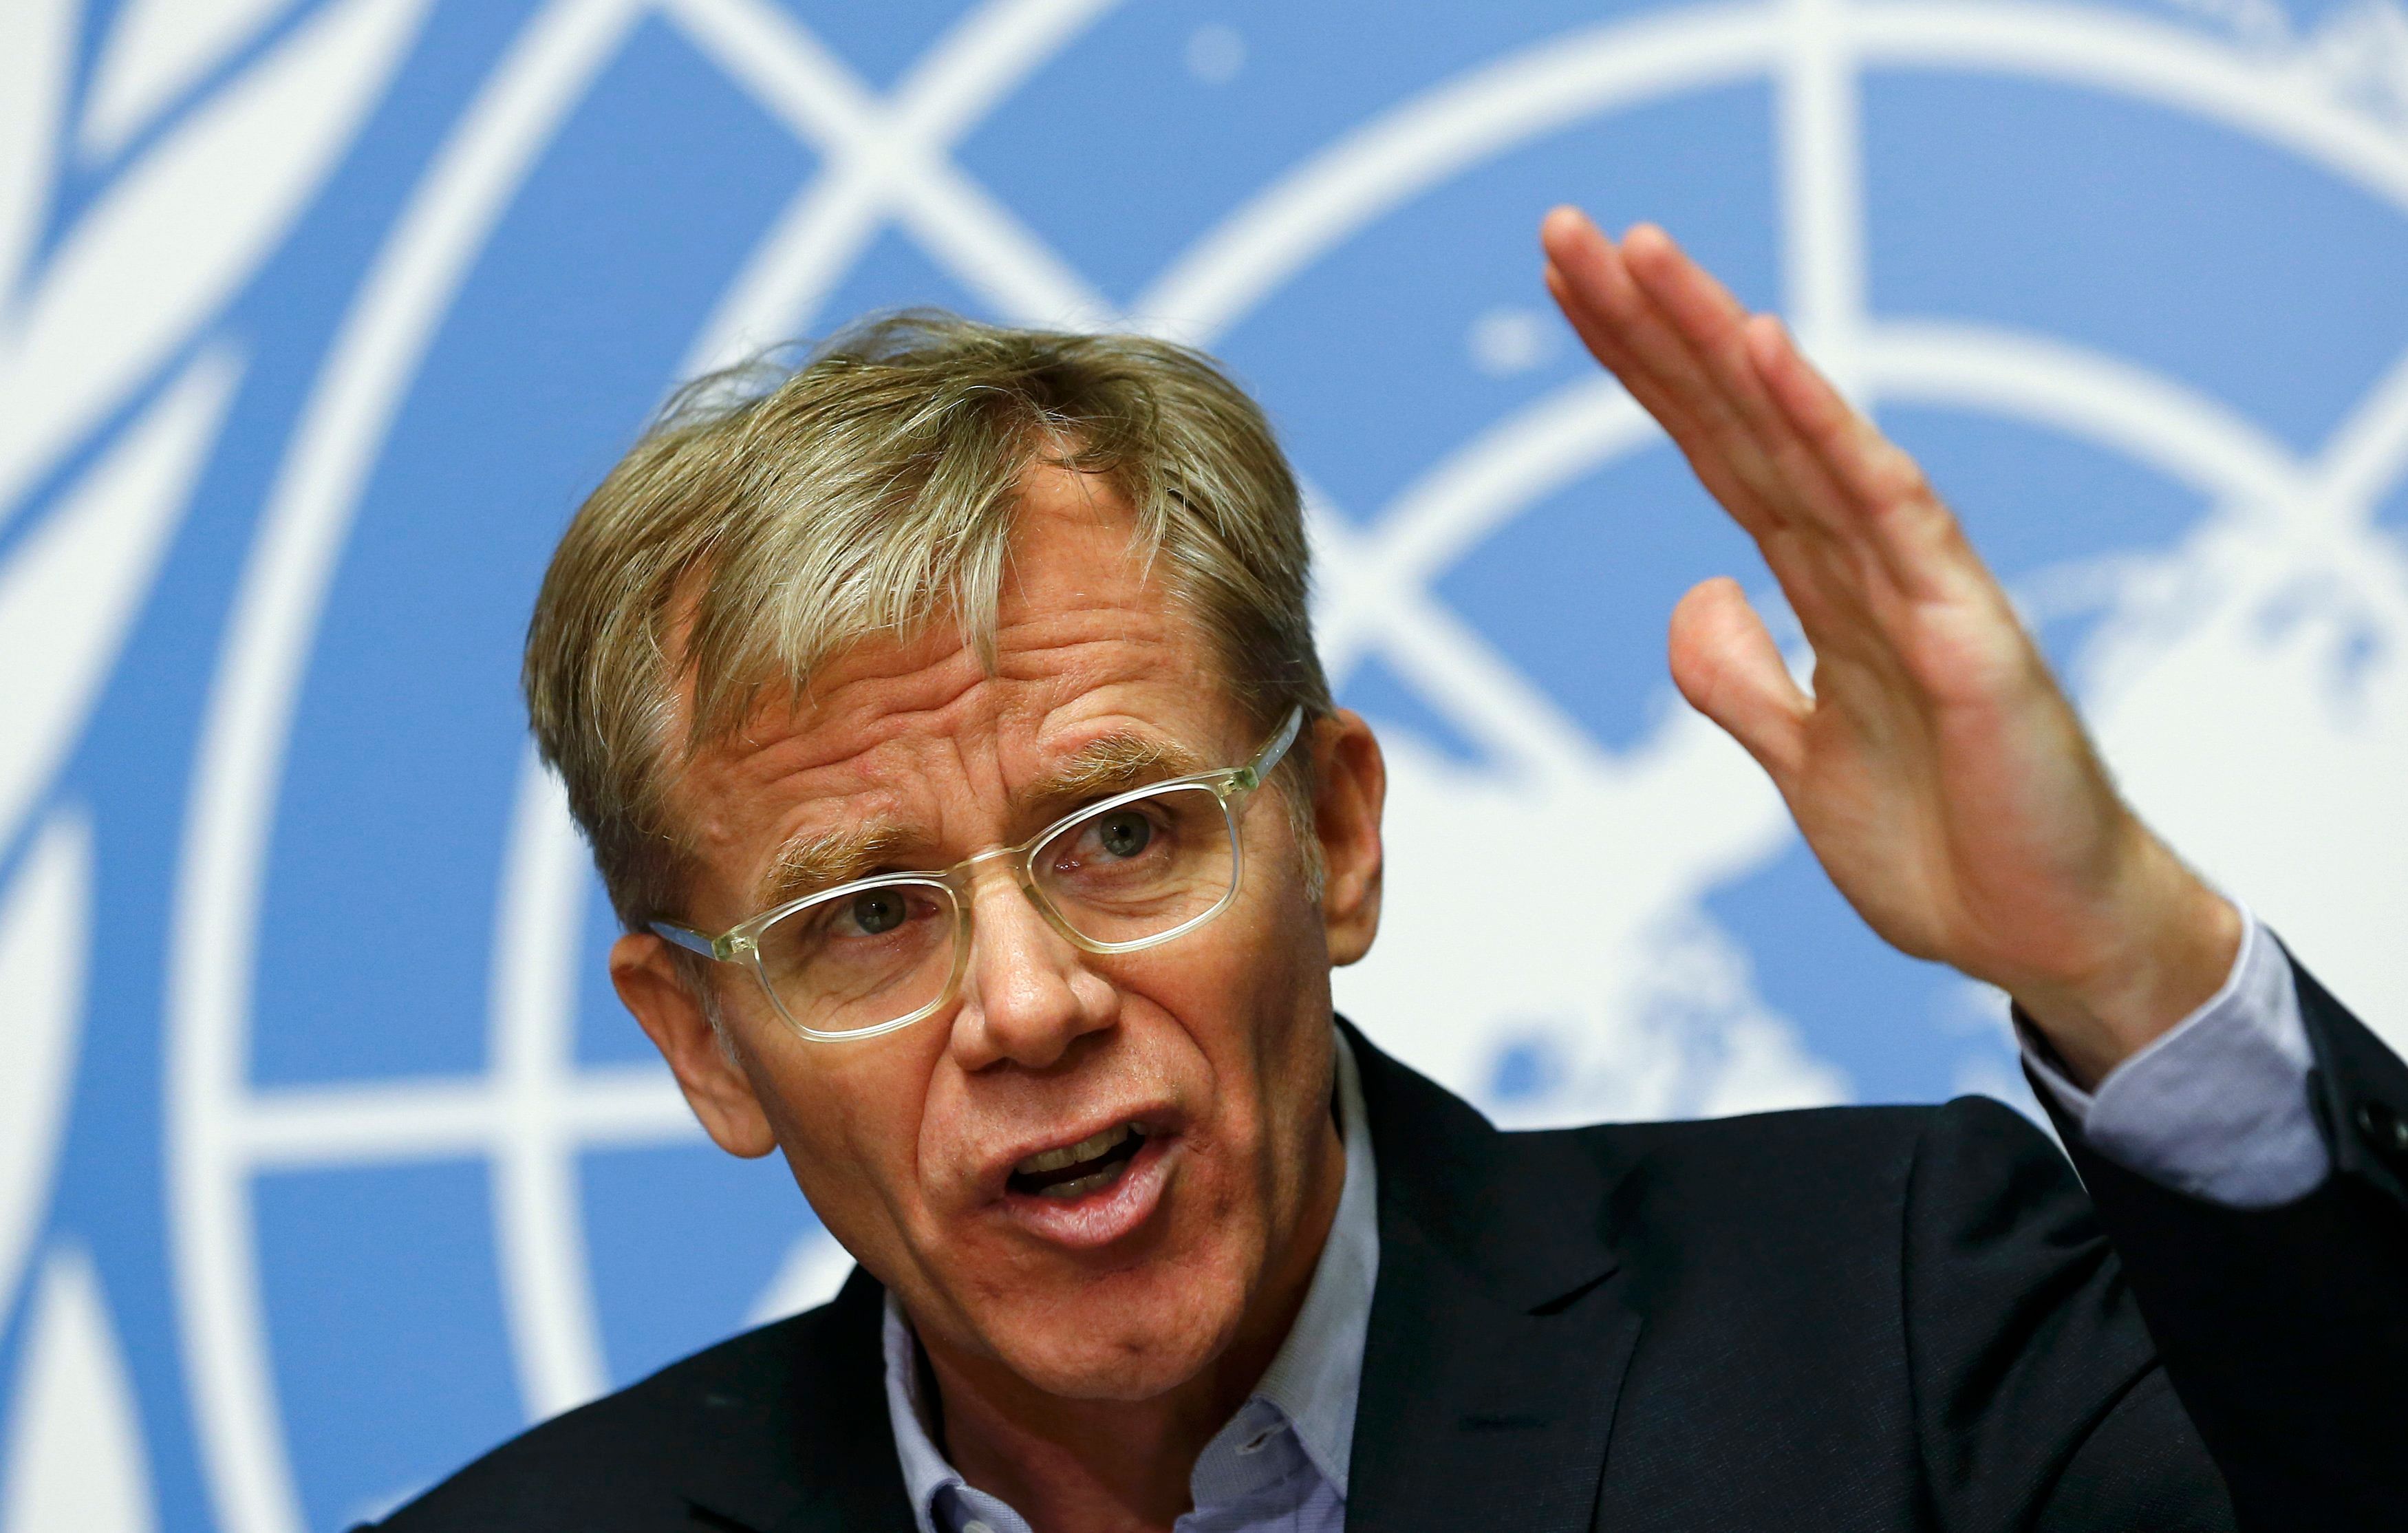 World Health Organization (WHO) Assistant Director General Bruce Aylward gestures during a news conference on the WHO response and challenges to control the Ebola outbreak at the United Nations in Geneva December 1, 2014. Photo: Reuters